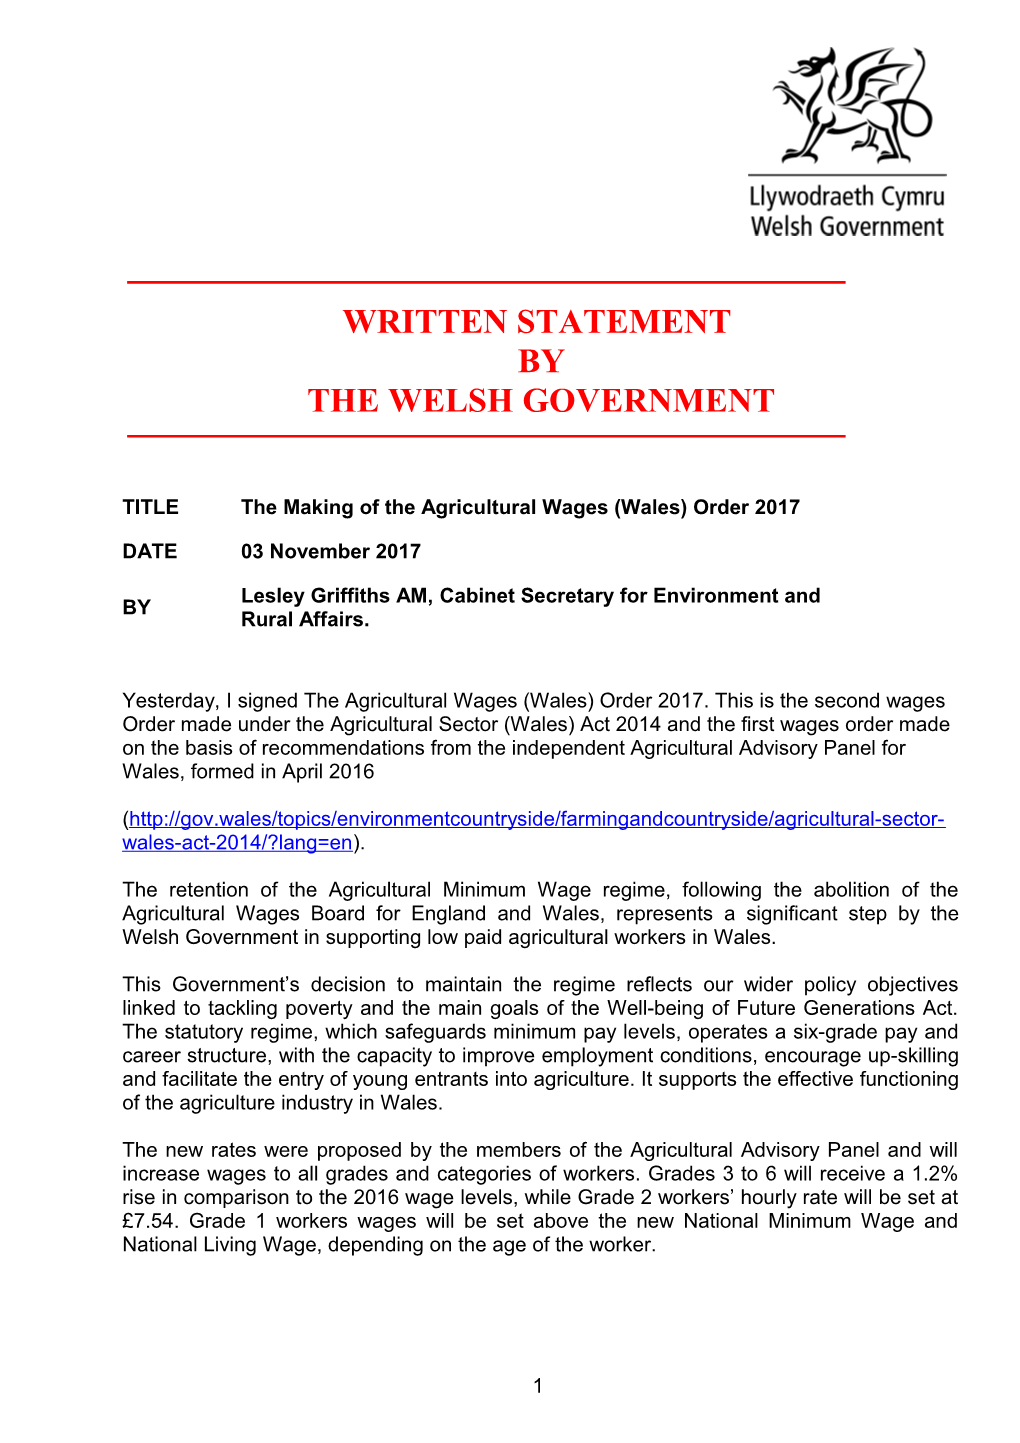 The Making of the Agricultural Wages (Wales) Order 2017